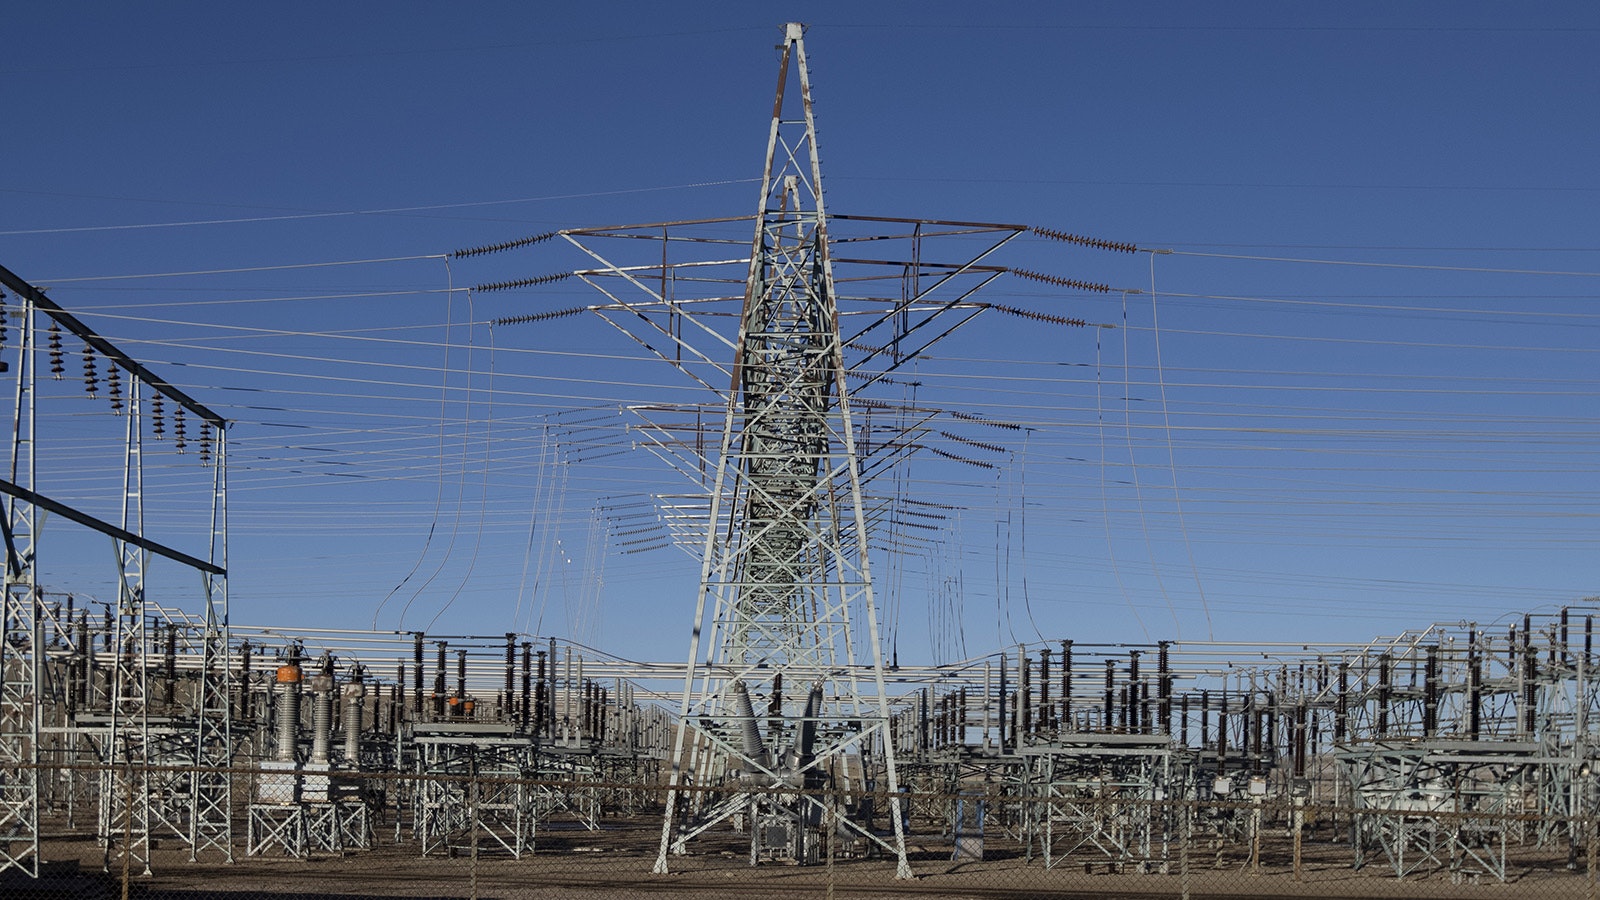 The Naughton power substation in Kemmerer delivers electricity to Rocky Mountain Power customers in Wyoming.